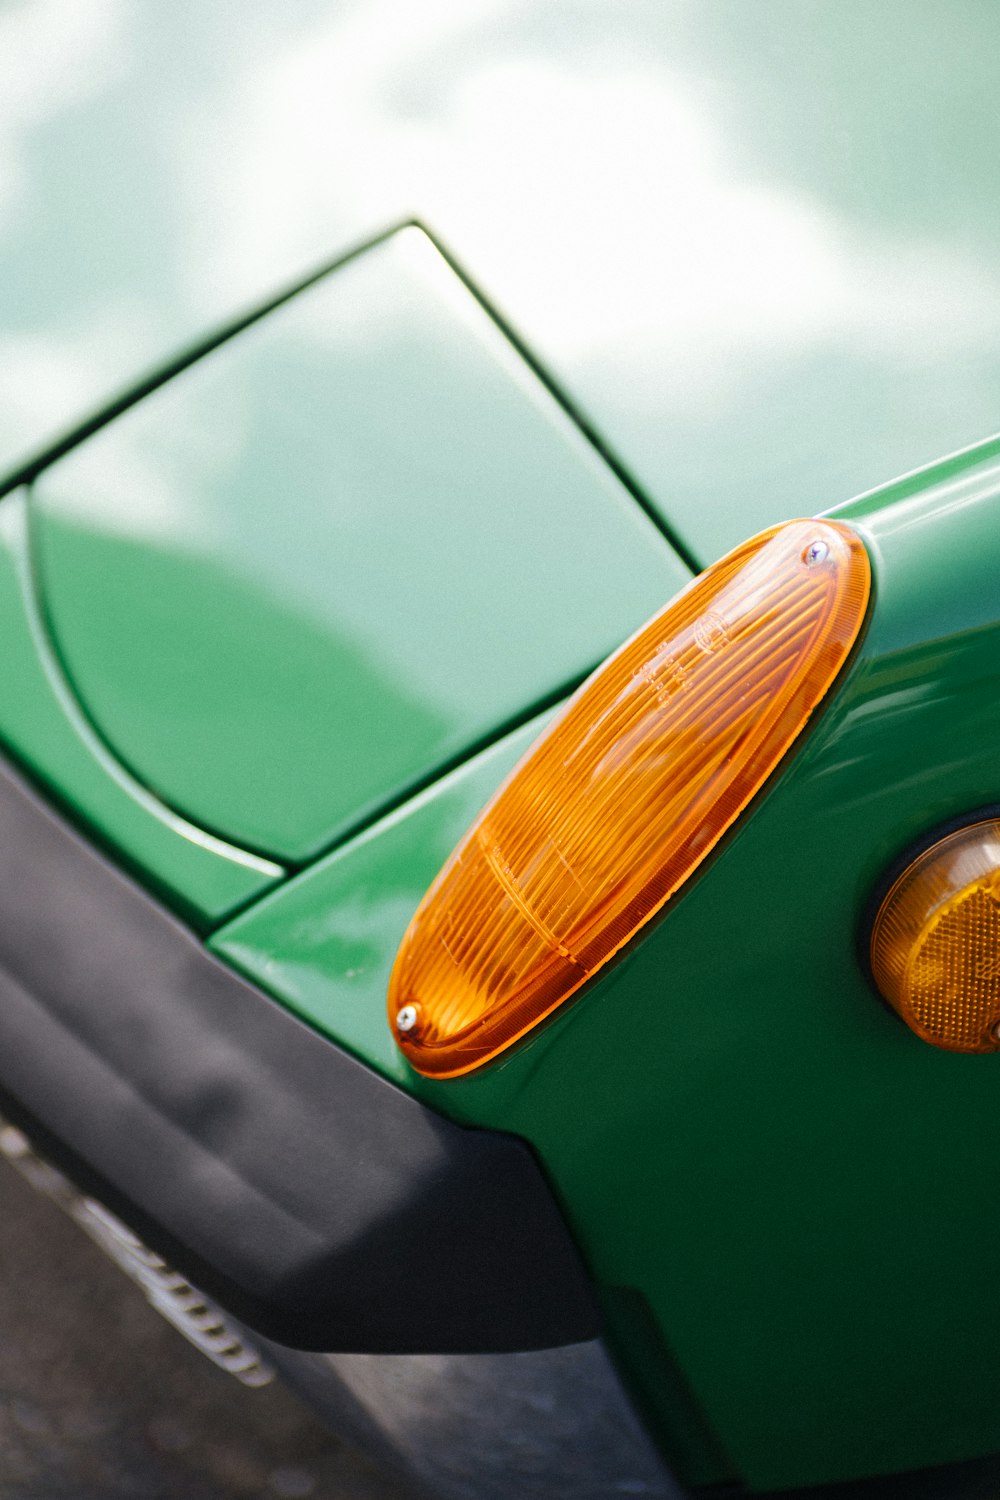 a close up of the tail light of a green sports car